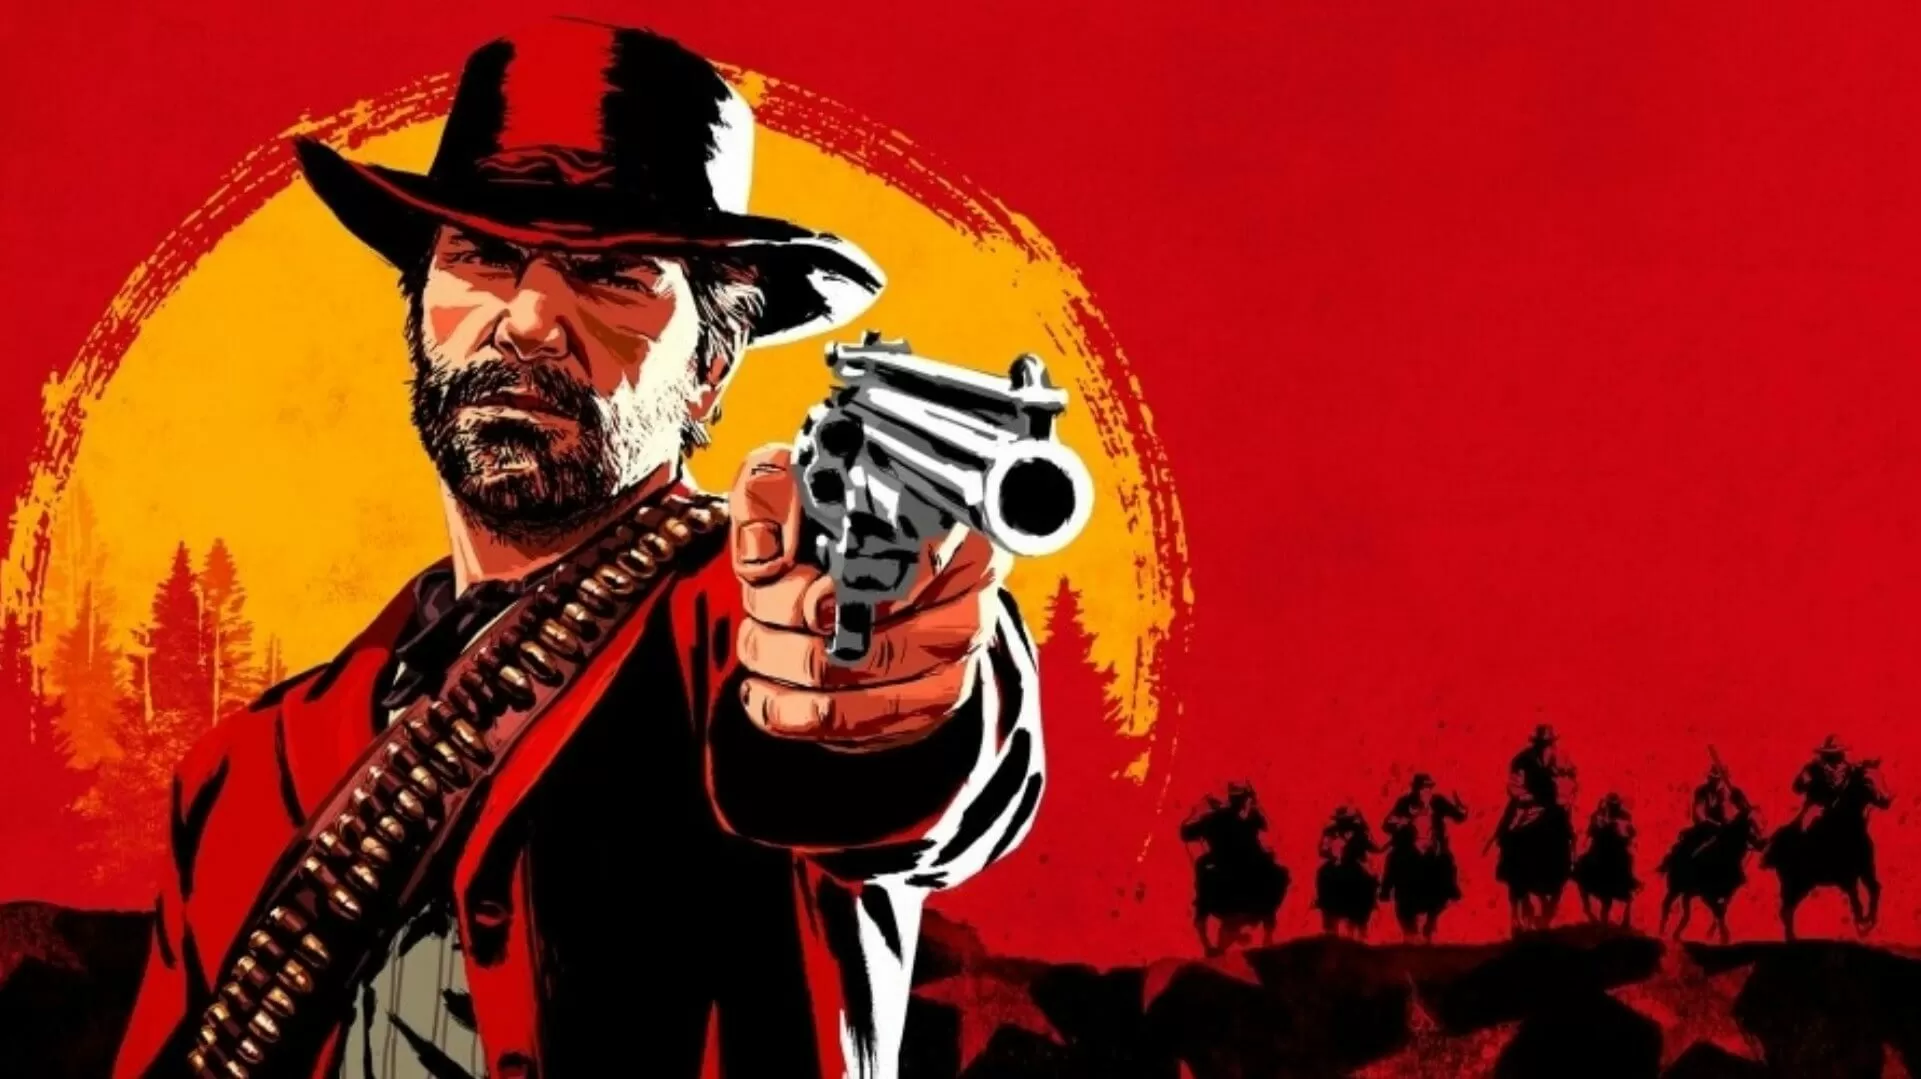 Red Dead Redemption 2 comes to PC on November 5